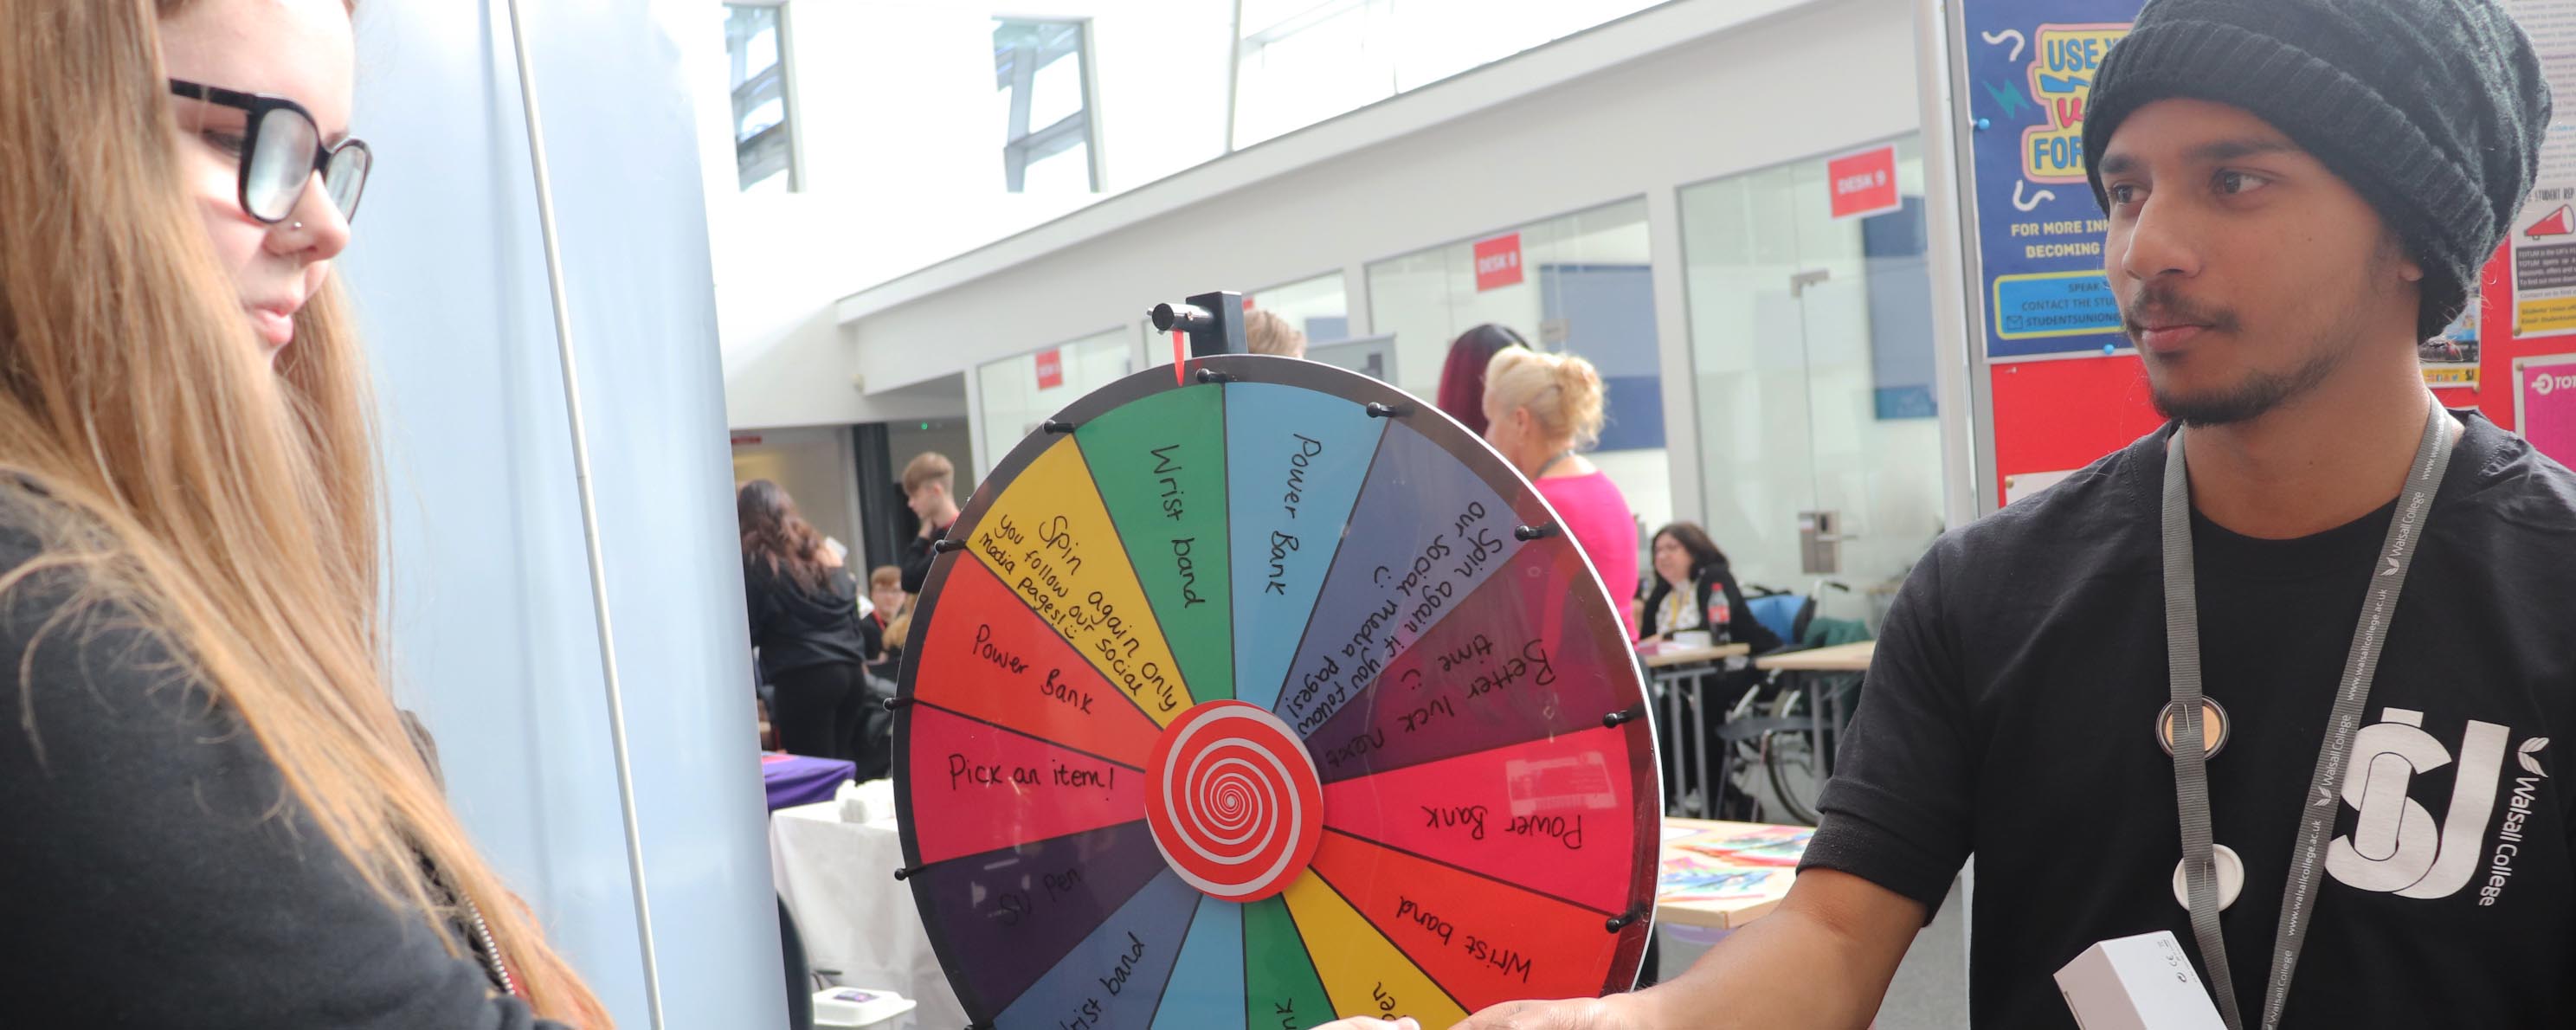 student in spin wheel activity